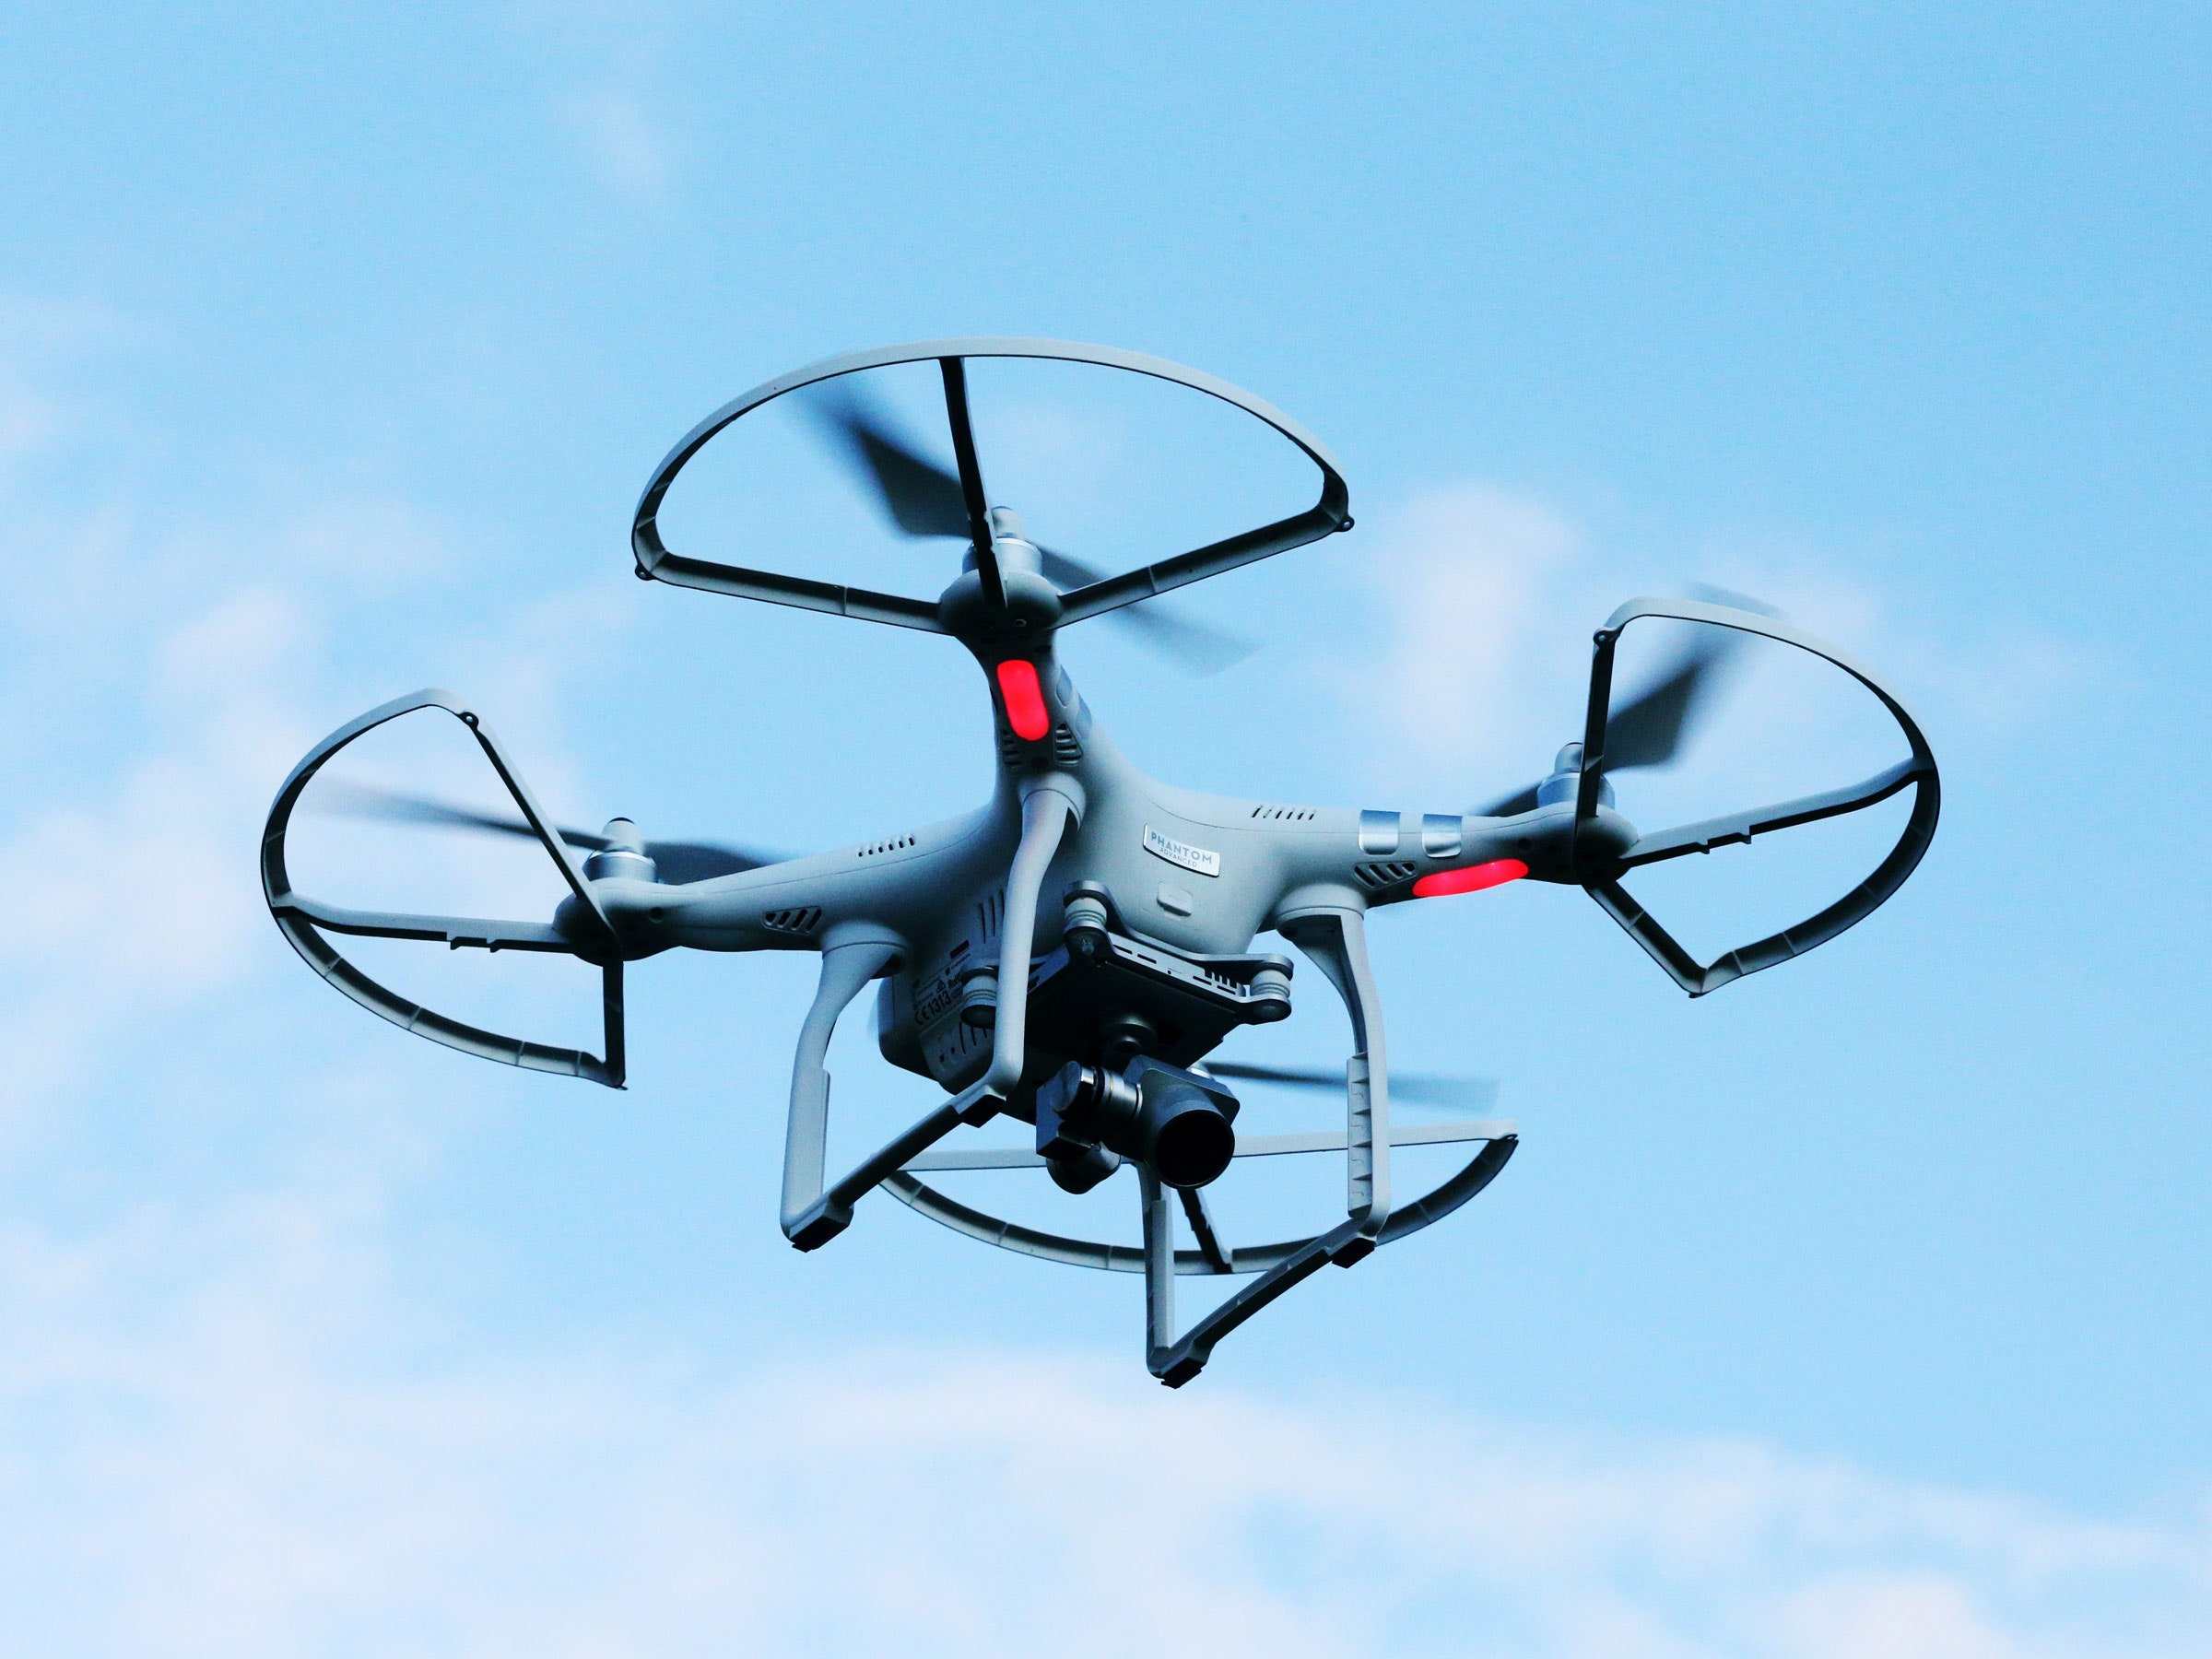 Concord Police To Host Neighborhood Meeting To Discuss Proposed Drone Program